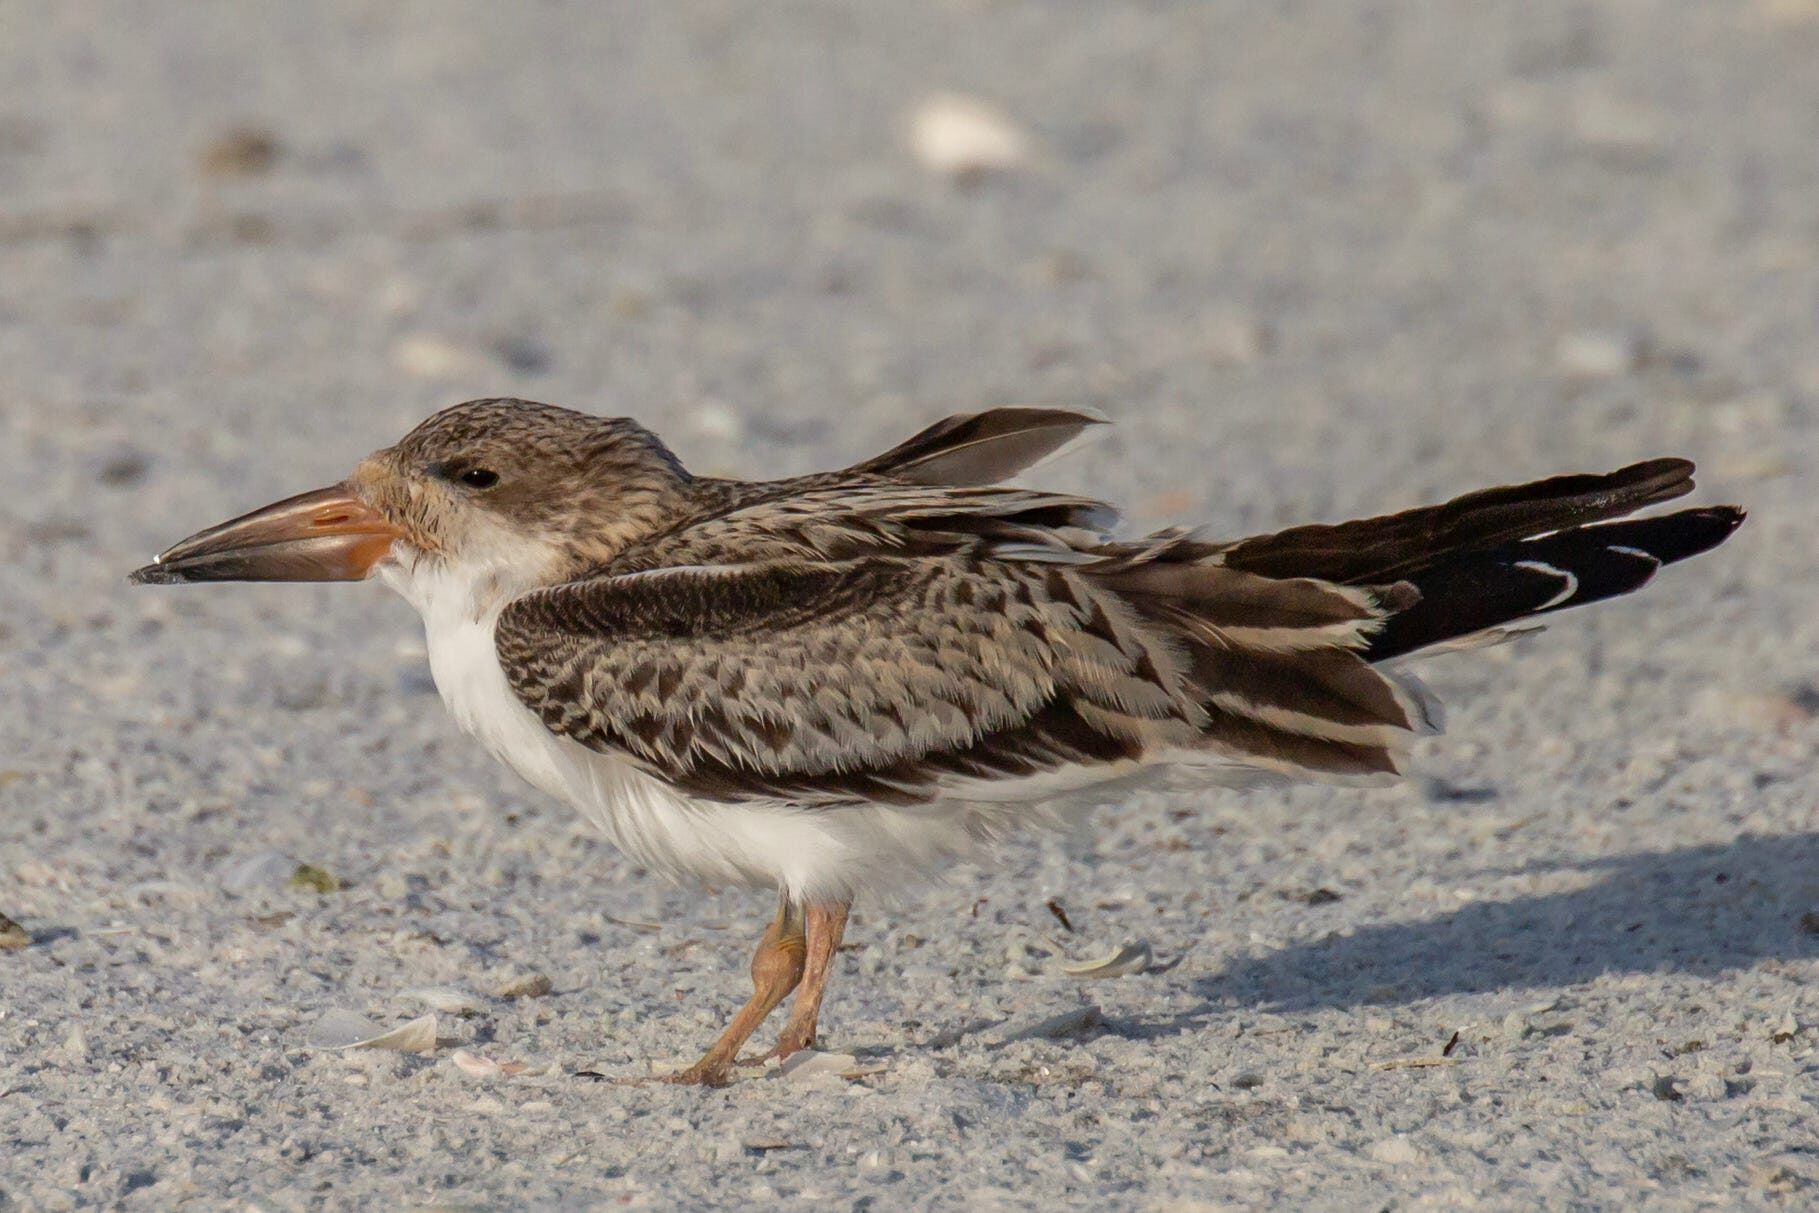 A young black skimmer with a swollen leg joint